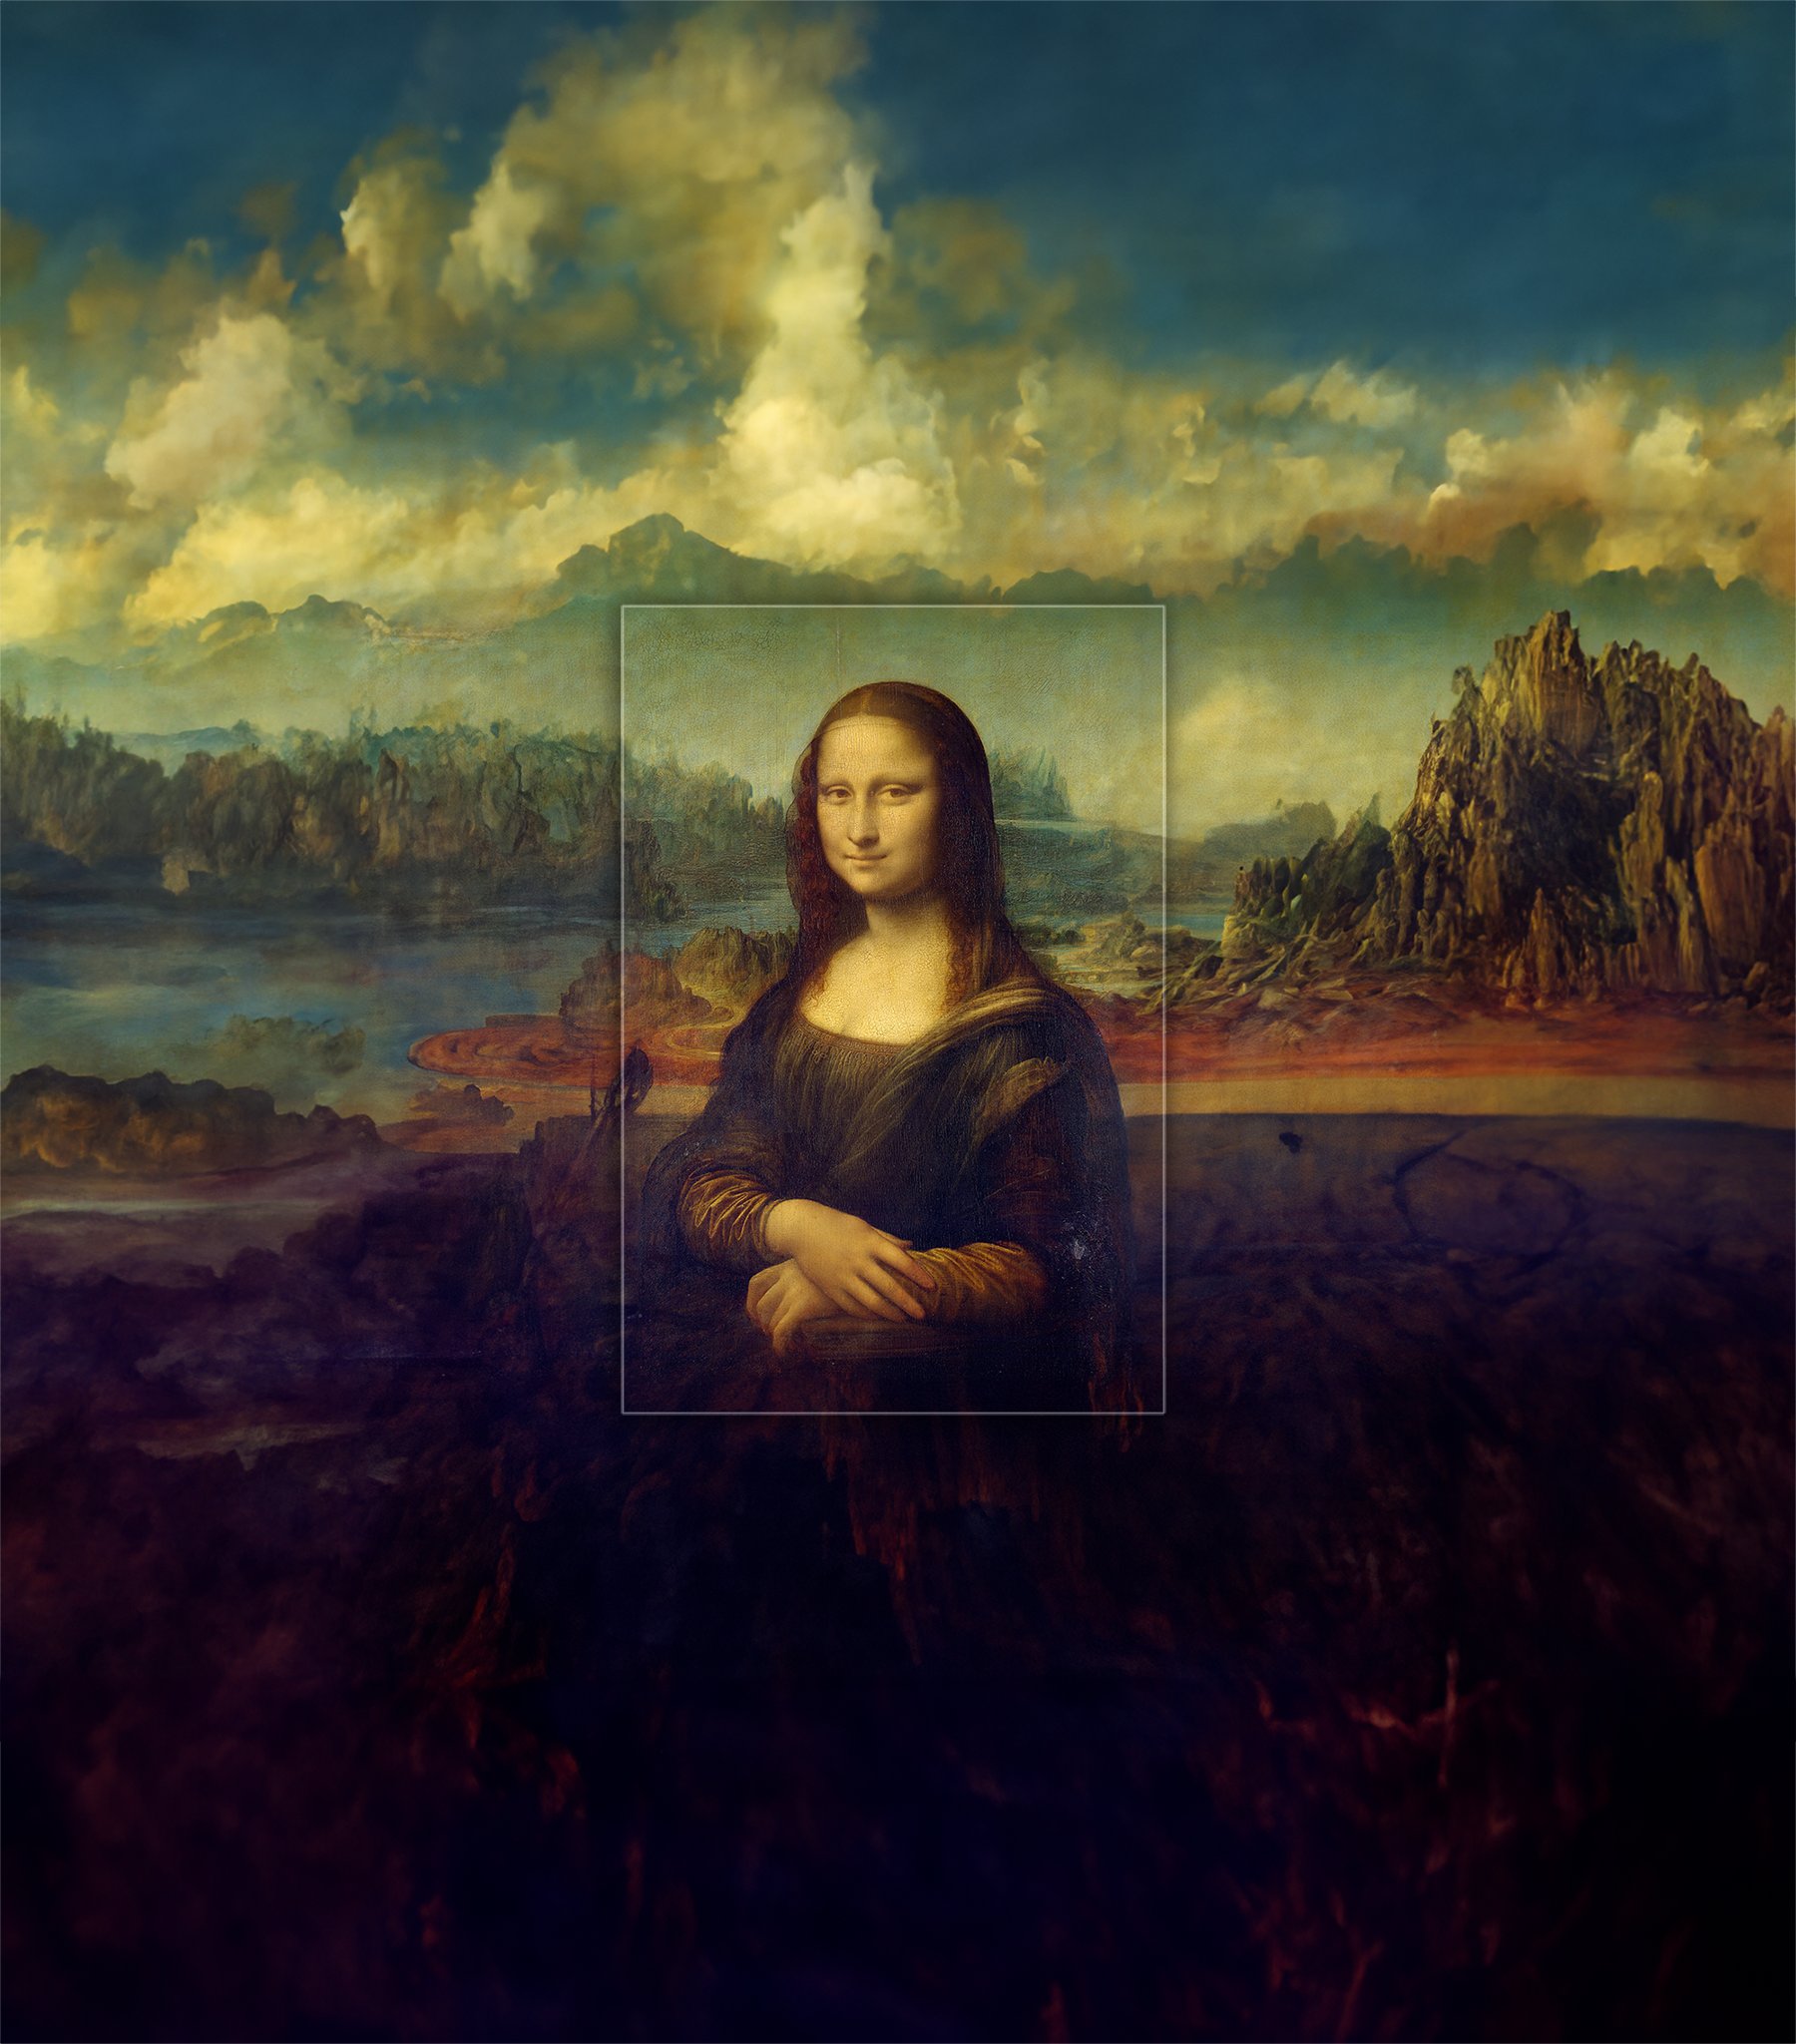 From Van Gogh to Bosch: the neural network in Photoshop has completed 12 famous paintings